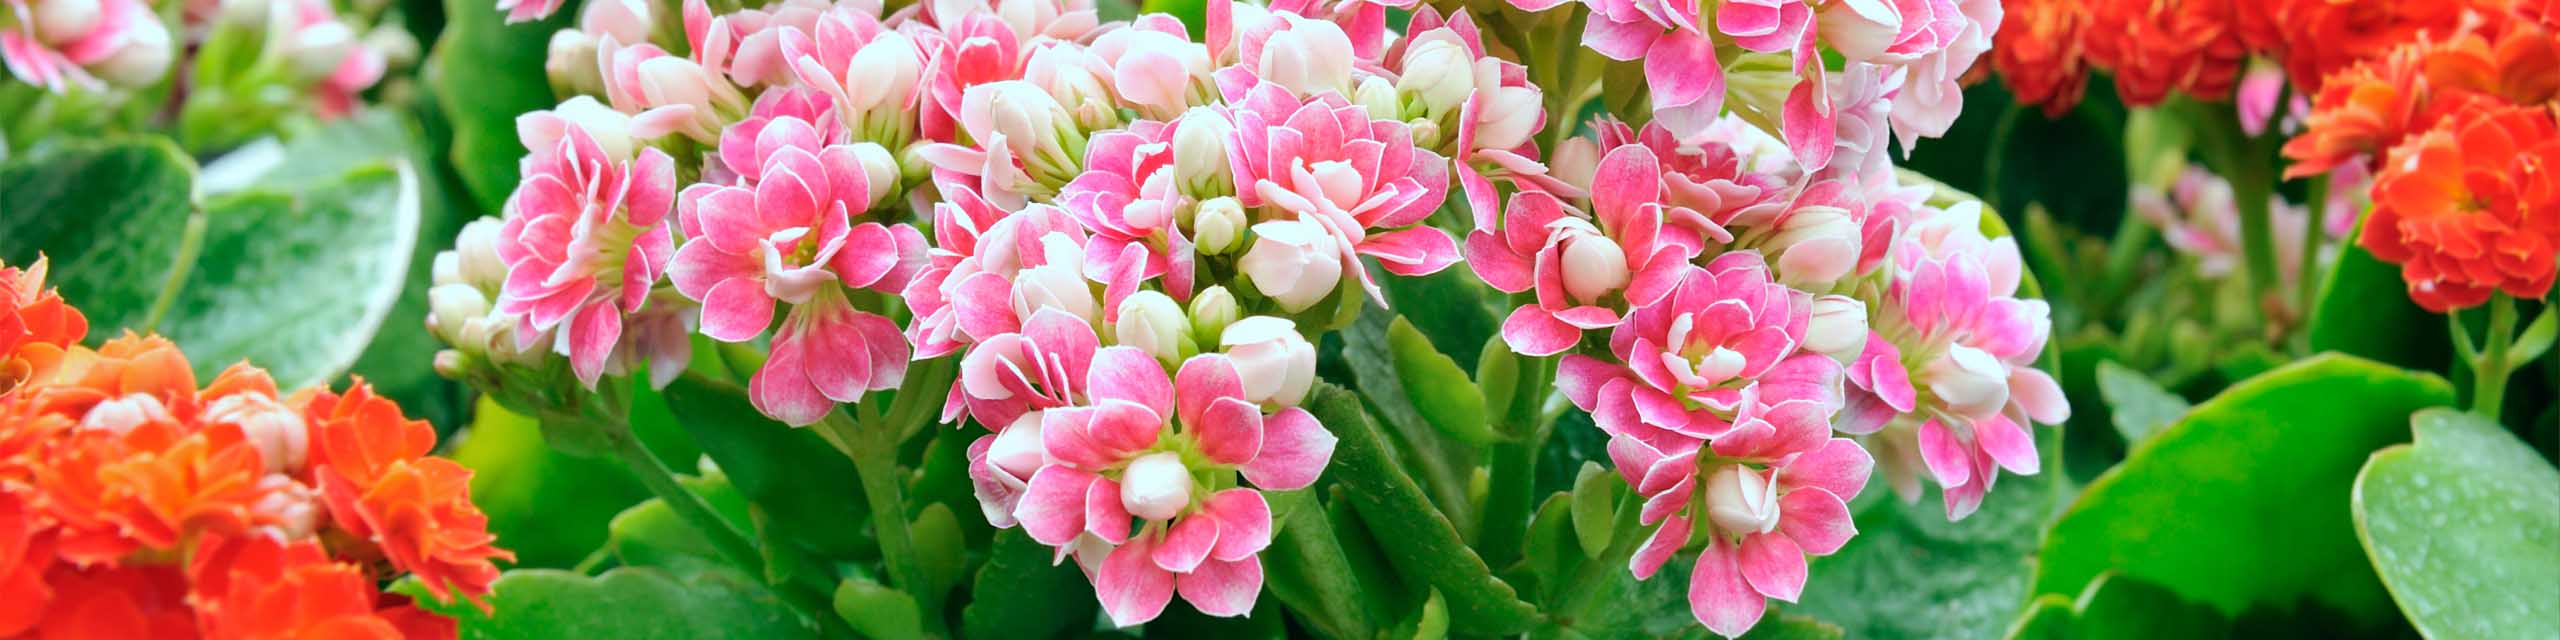 Pink and white flowers on a kalanchoe succulent.